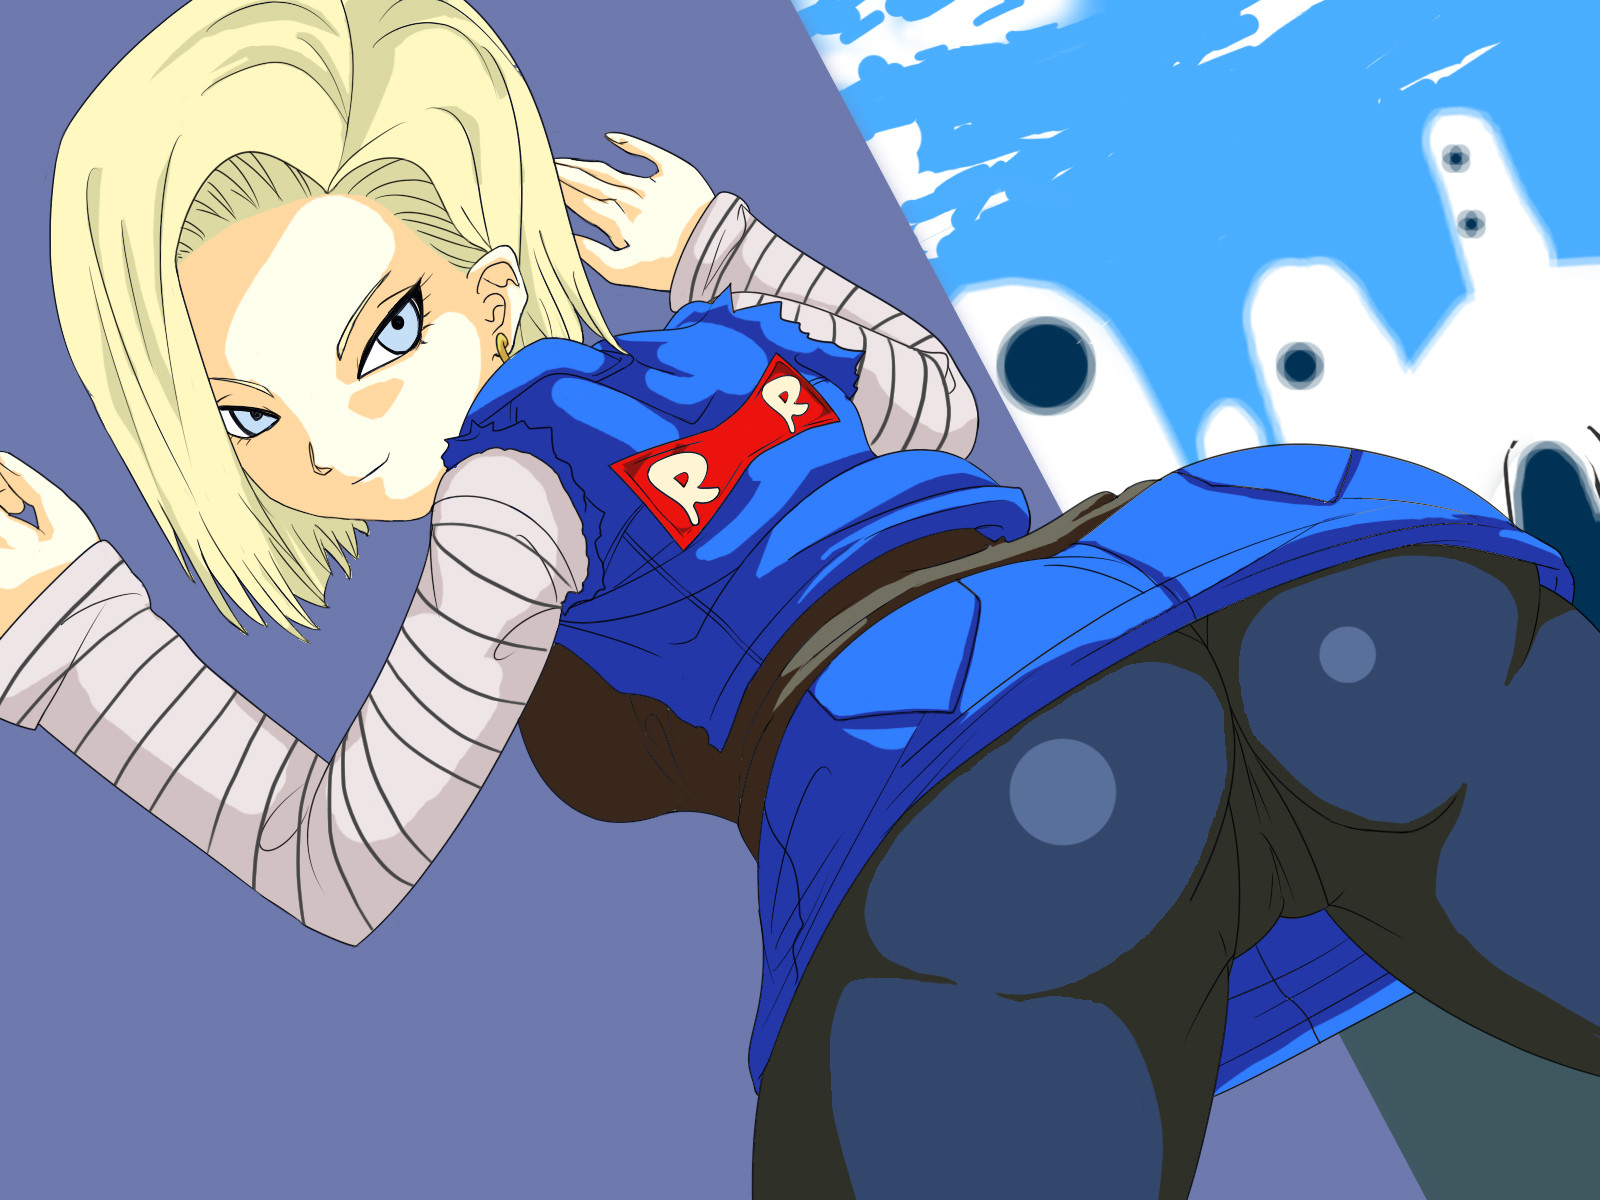 Blondies: Android 18.